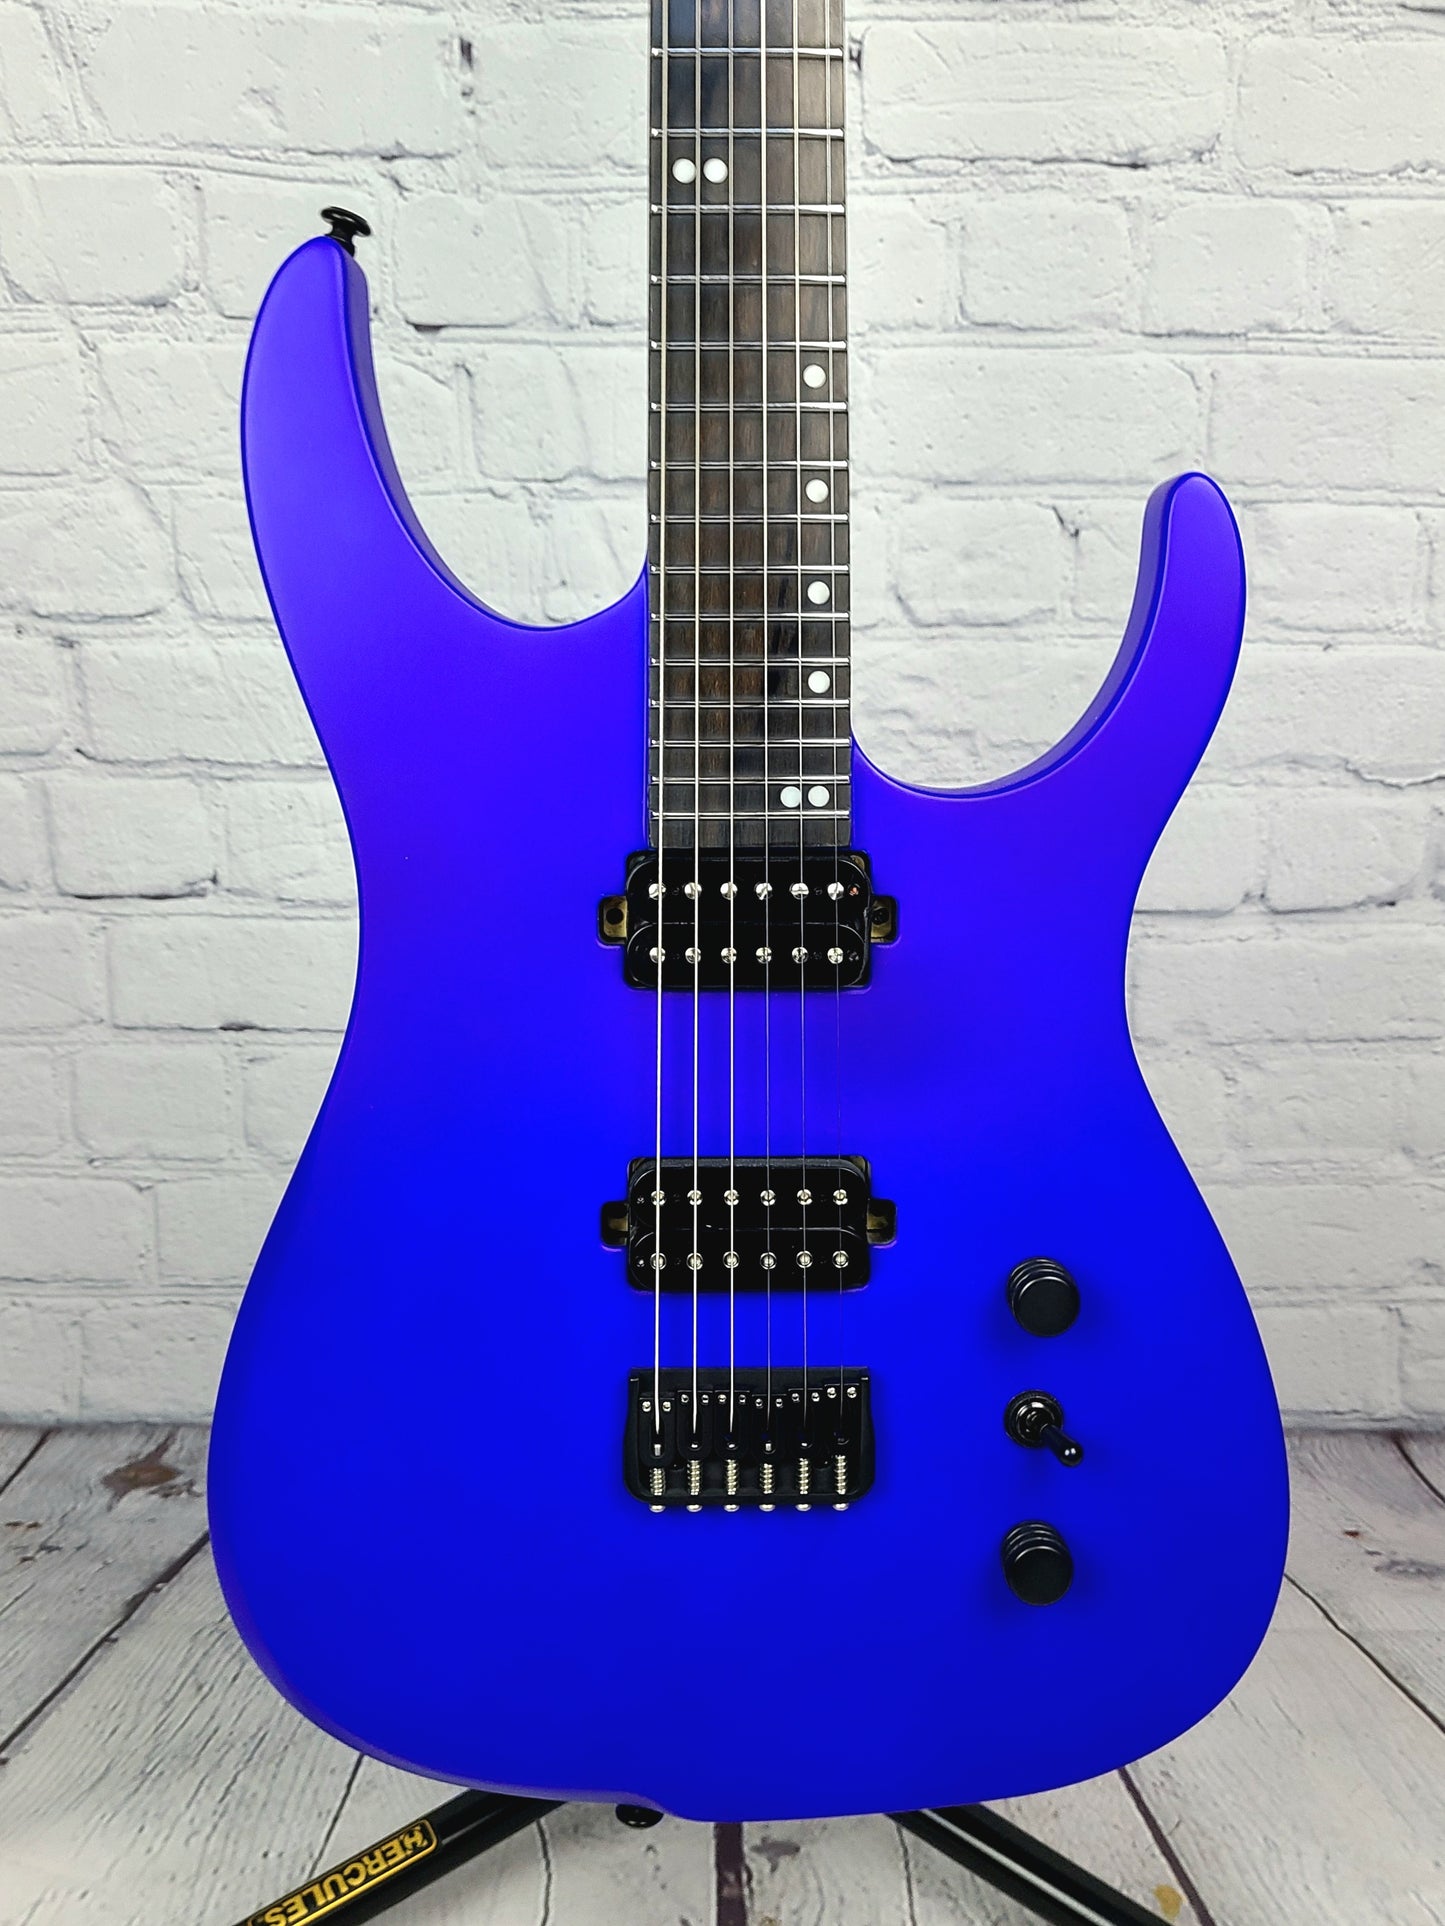 Ormsby Guitars Hype GTI 6 String Royal Blue Electric Guitar Standard Scale